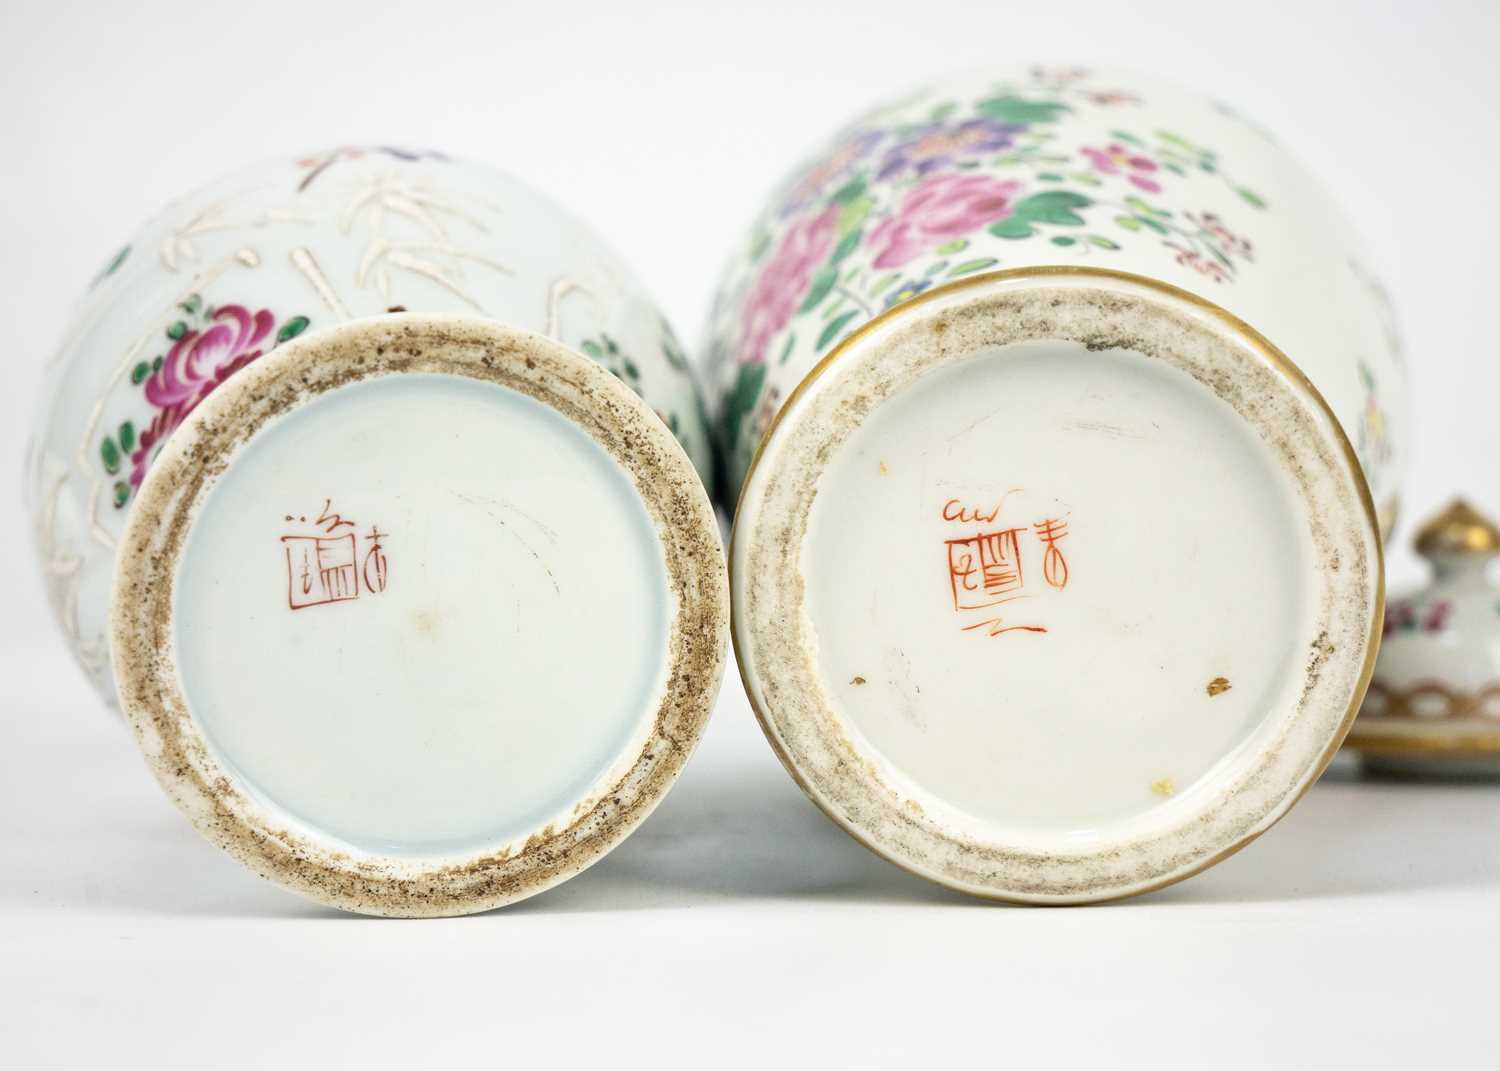 Two Samson porcelain famille rose vases, in Chinese export style, circa 1900. - Image 6 of 6